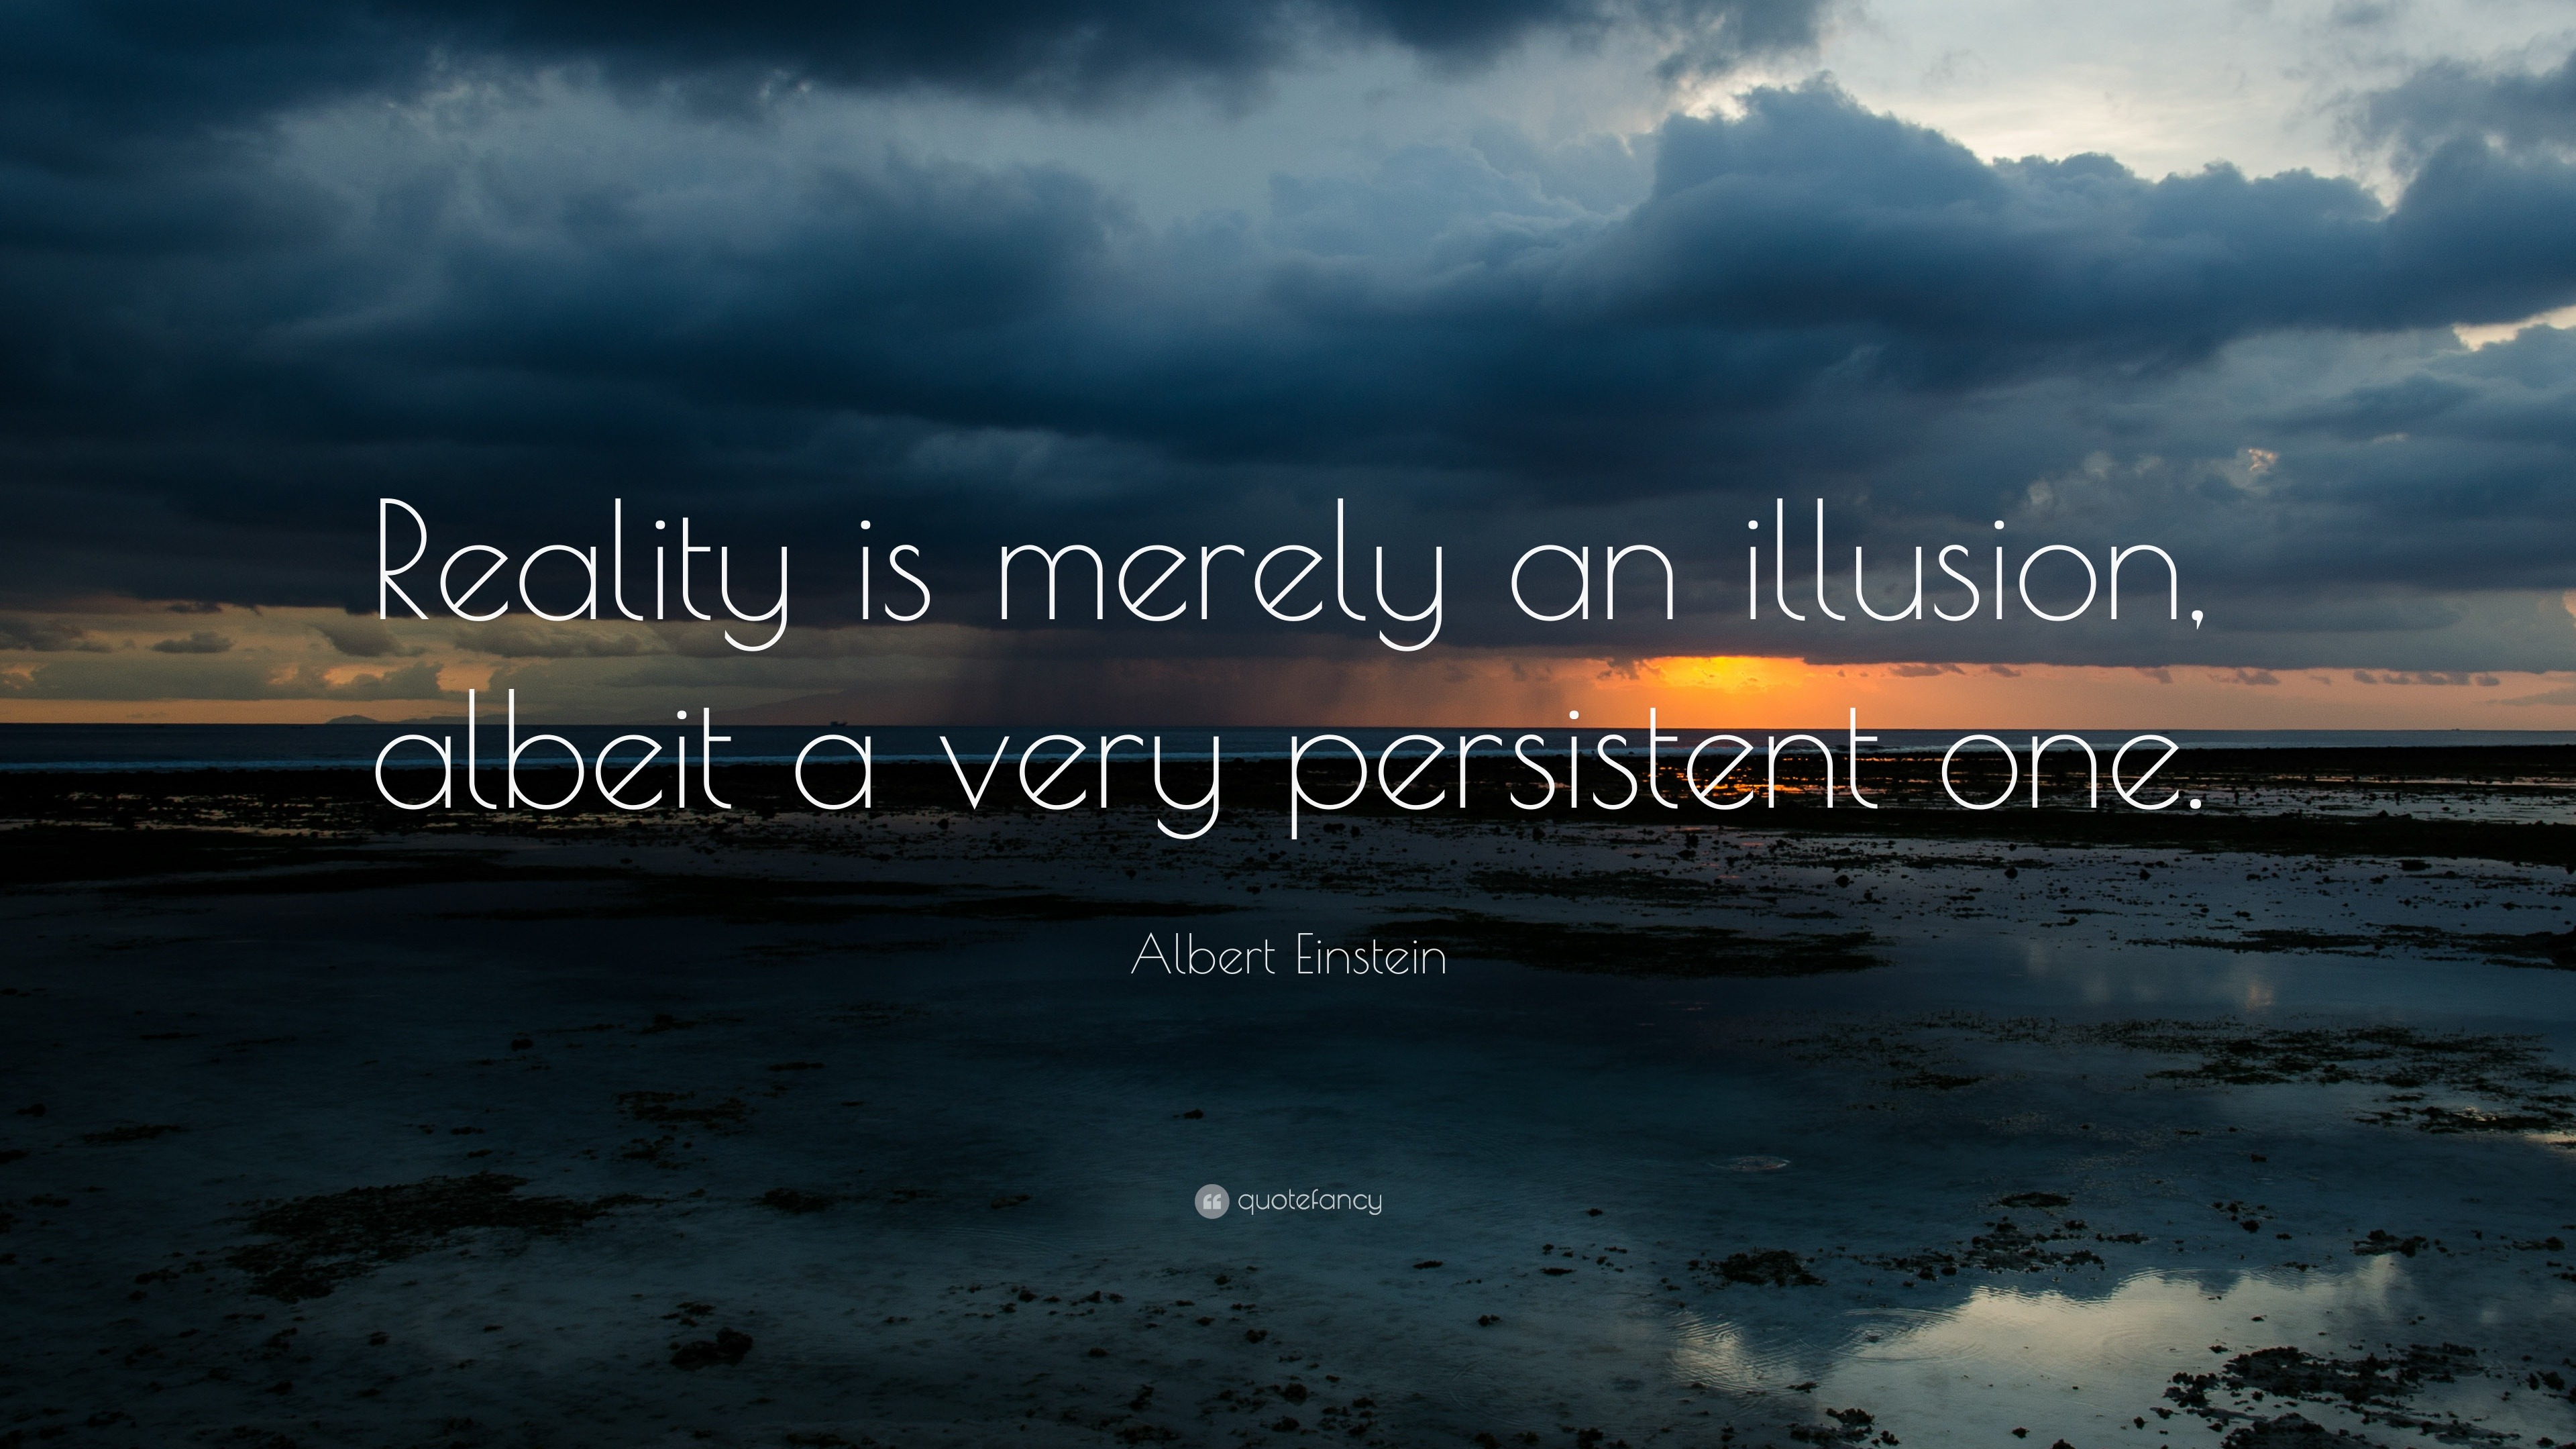 Albert Einstein Quote “Reality is merely an illusion